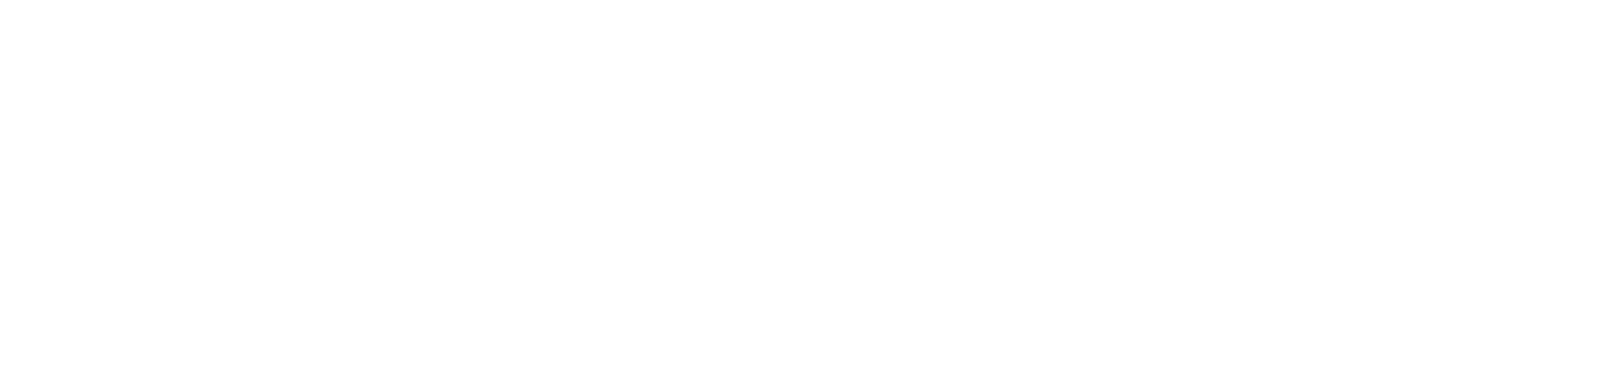 Labor Occupational Safety and Health Program